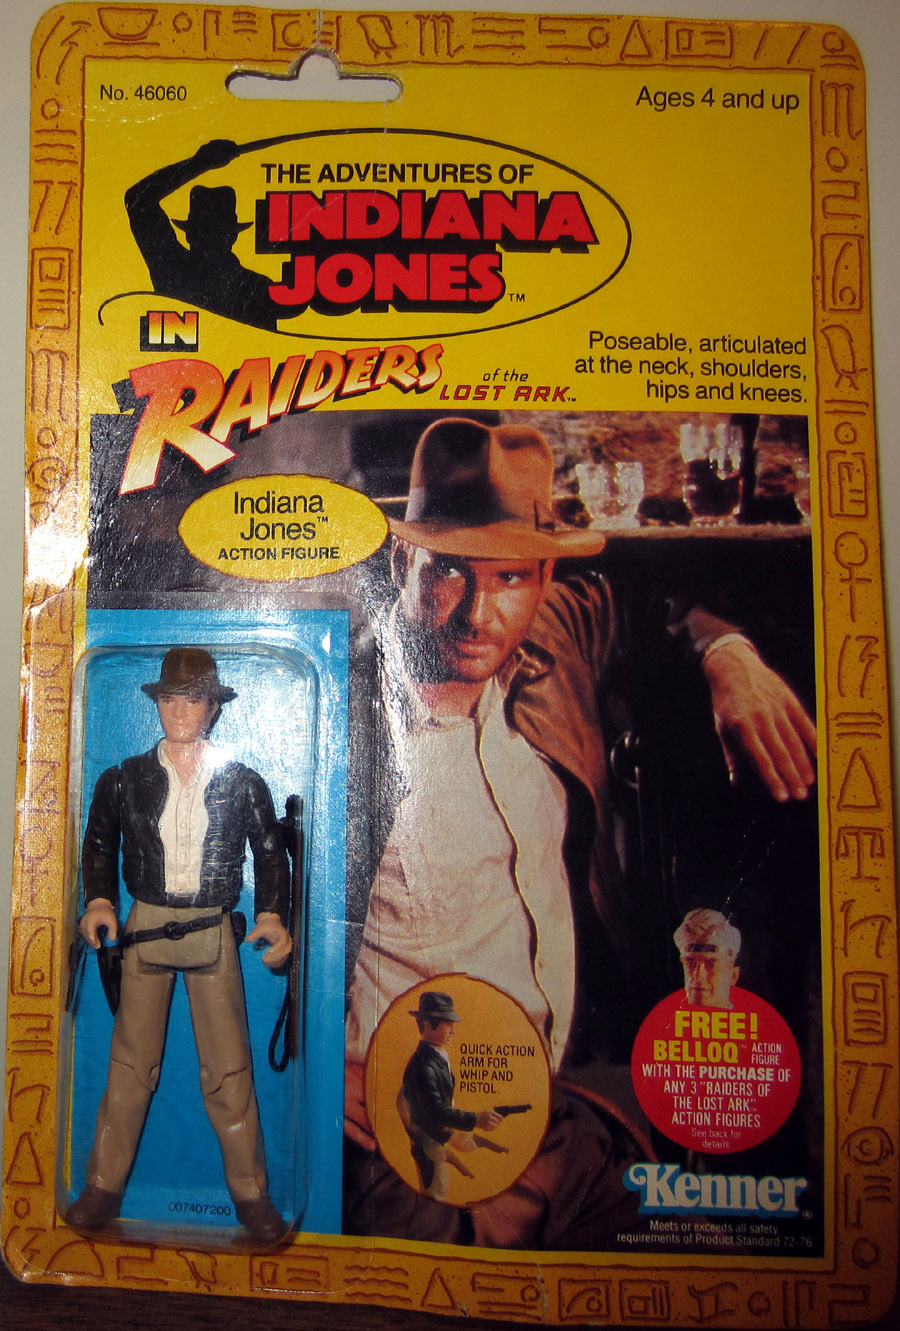 KENNER INDIANA JONES VINTAGE FIGUR THIS SALE IS FOR ACRYLIC CASES ONLY NO TOYS 